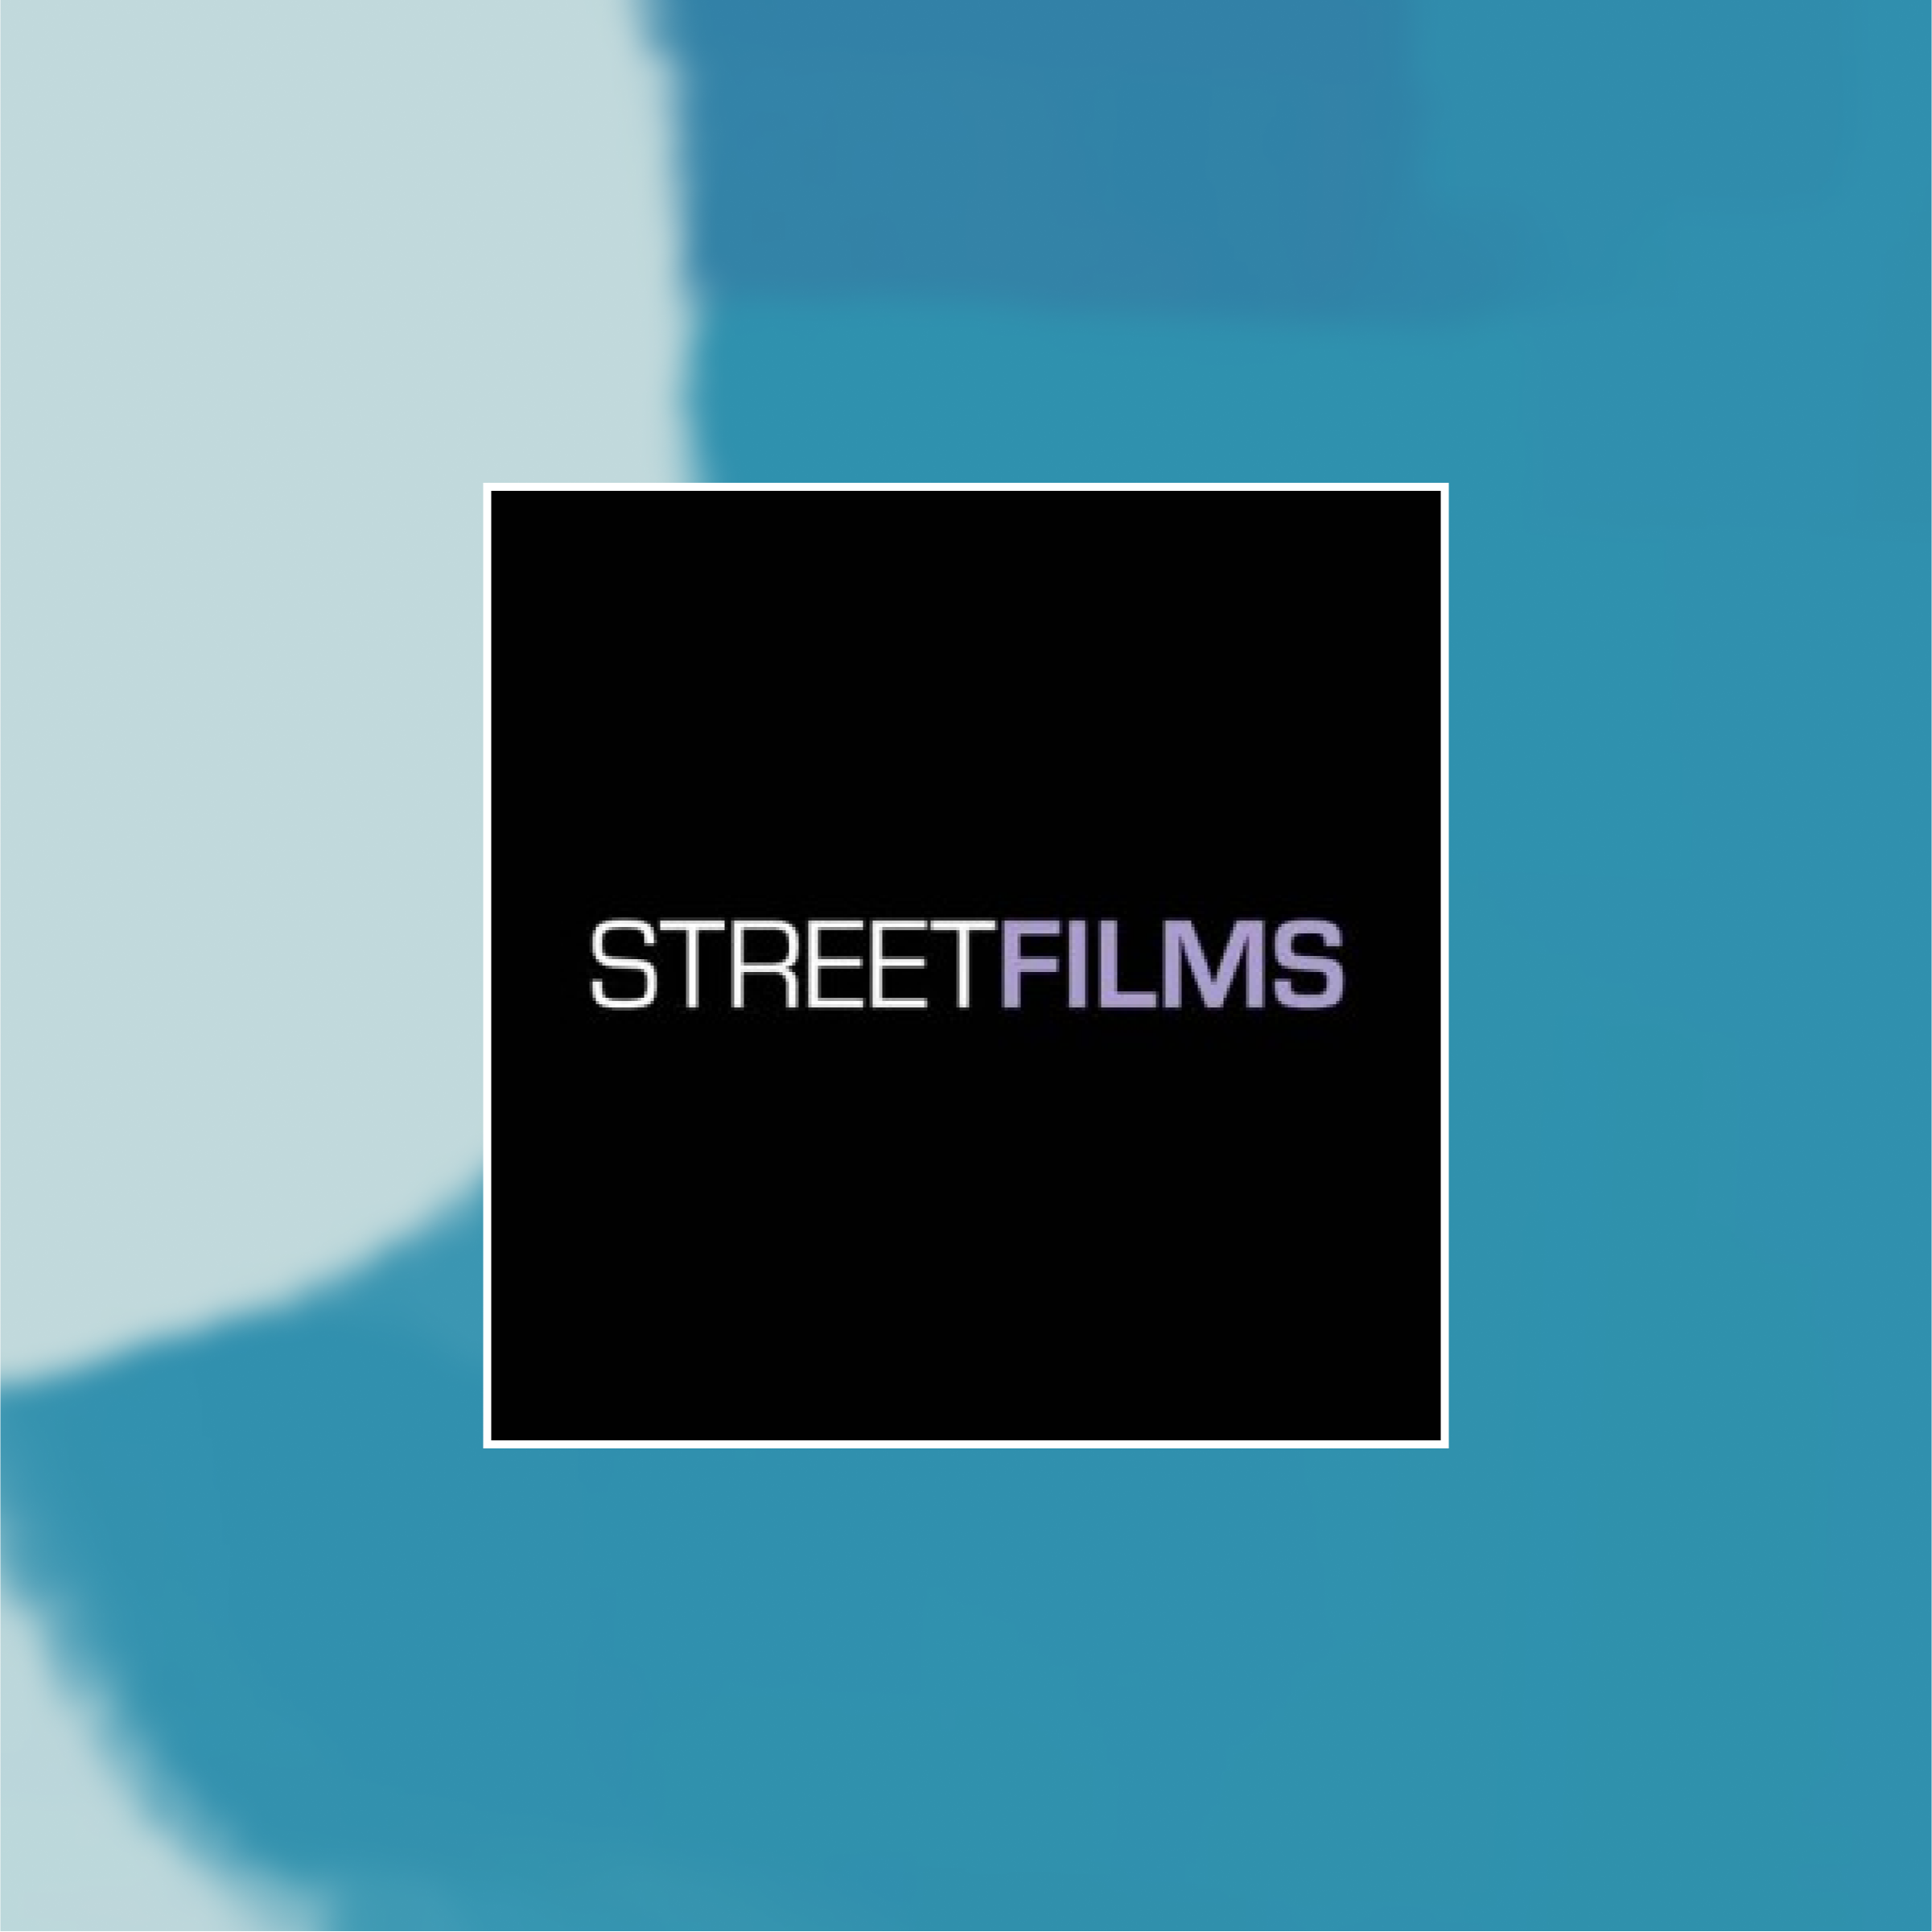 Cover of Streetfilms against a painted abstract background